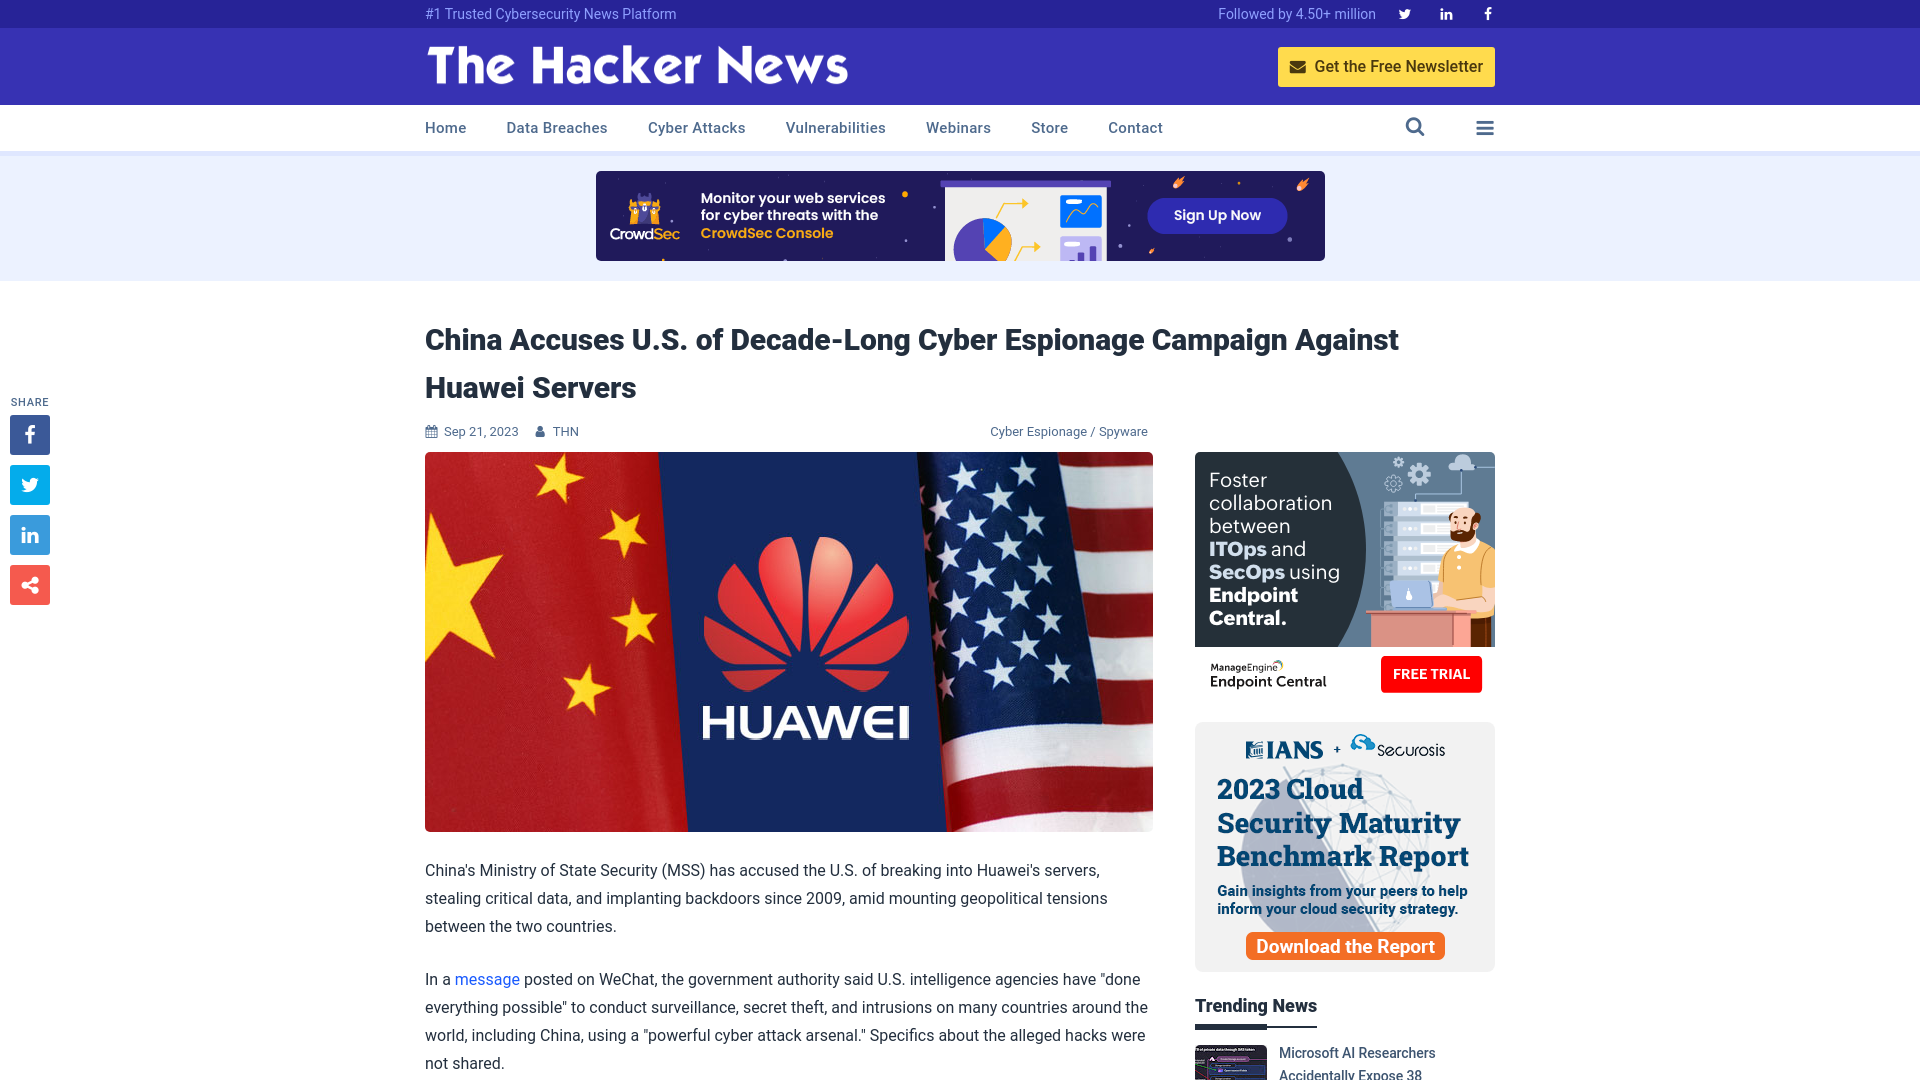 China Accuses U.S. of Decade-Long Cyber Espionage Campaign Against Huawei Servers